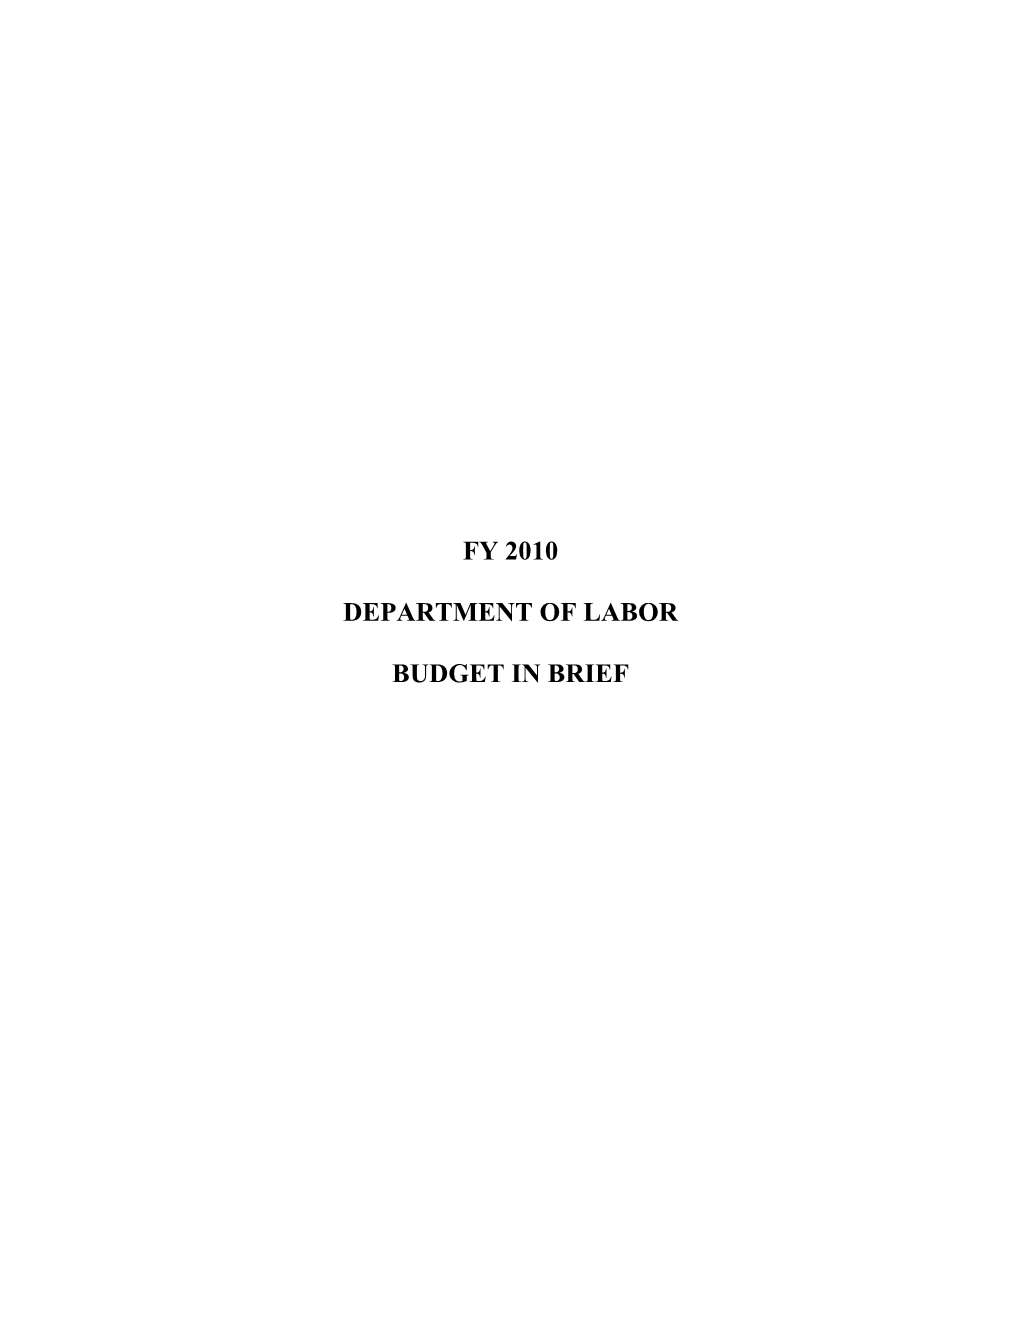 Fy 2010 Department of Labor Budget in Brief